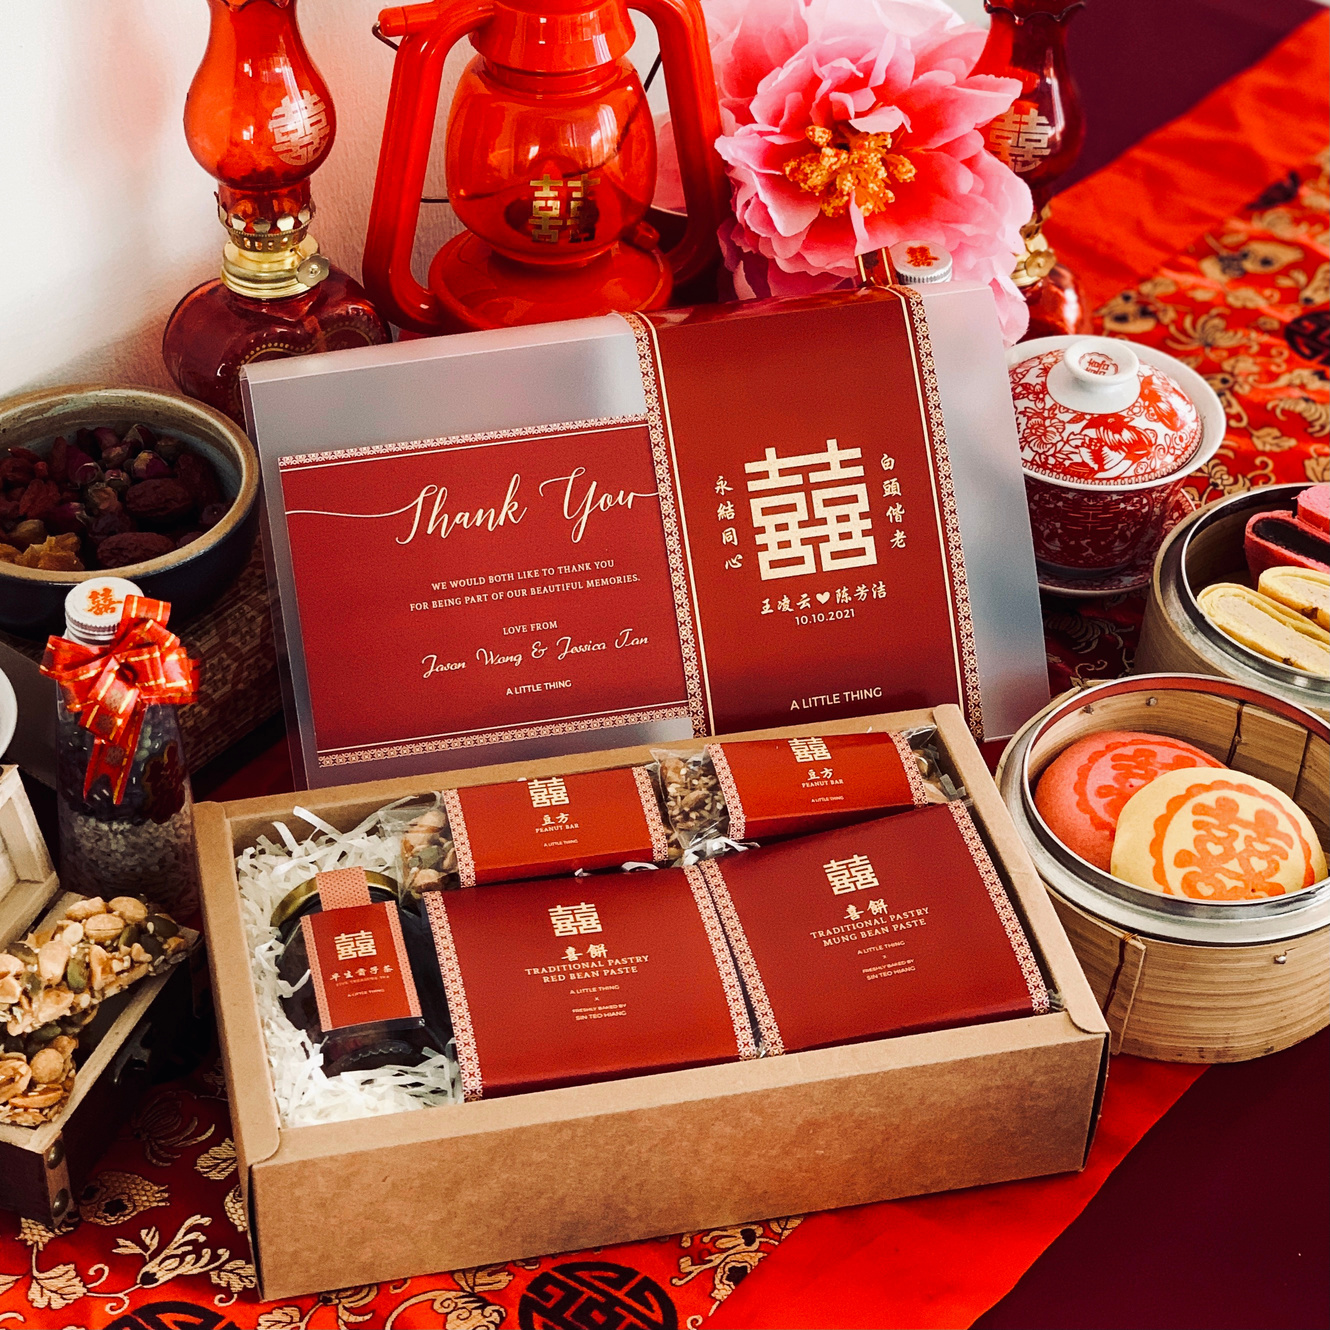 A Classic Wedding Gift Box for an elegant traditional betrothal ceremony.